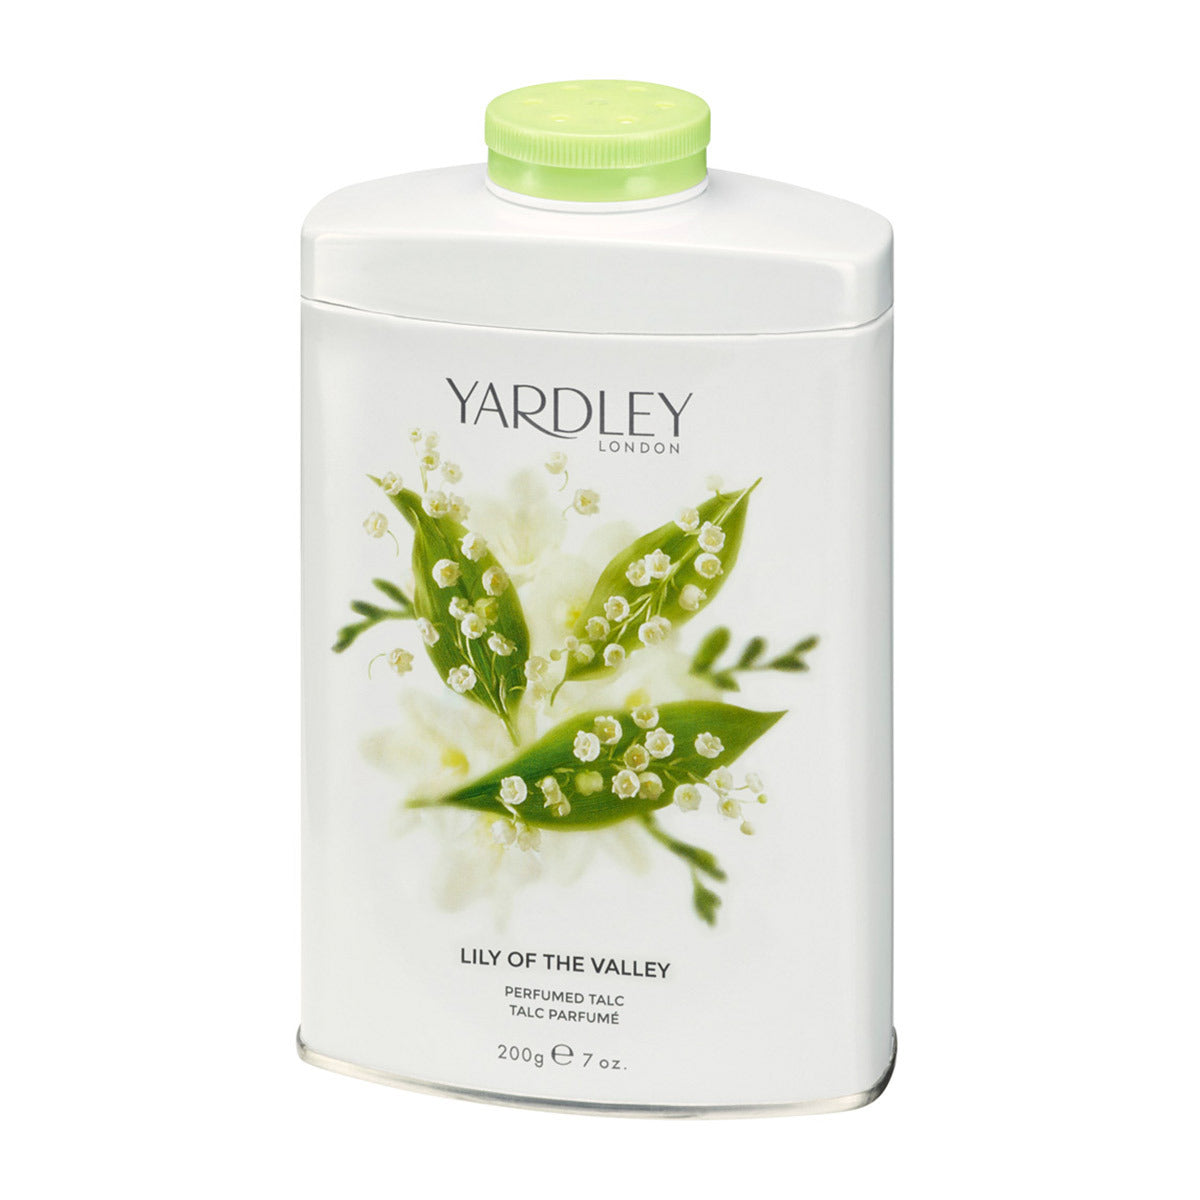 Primary image of Lily of the Valley Perfumed Talc